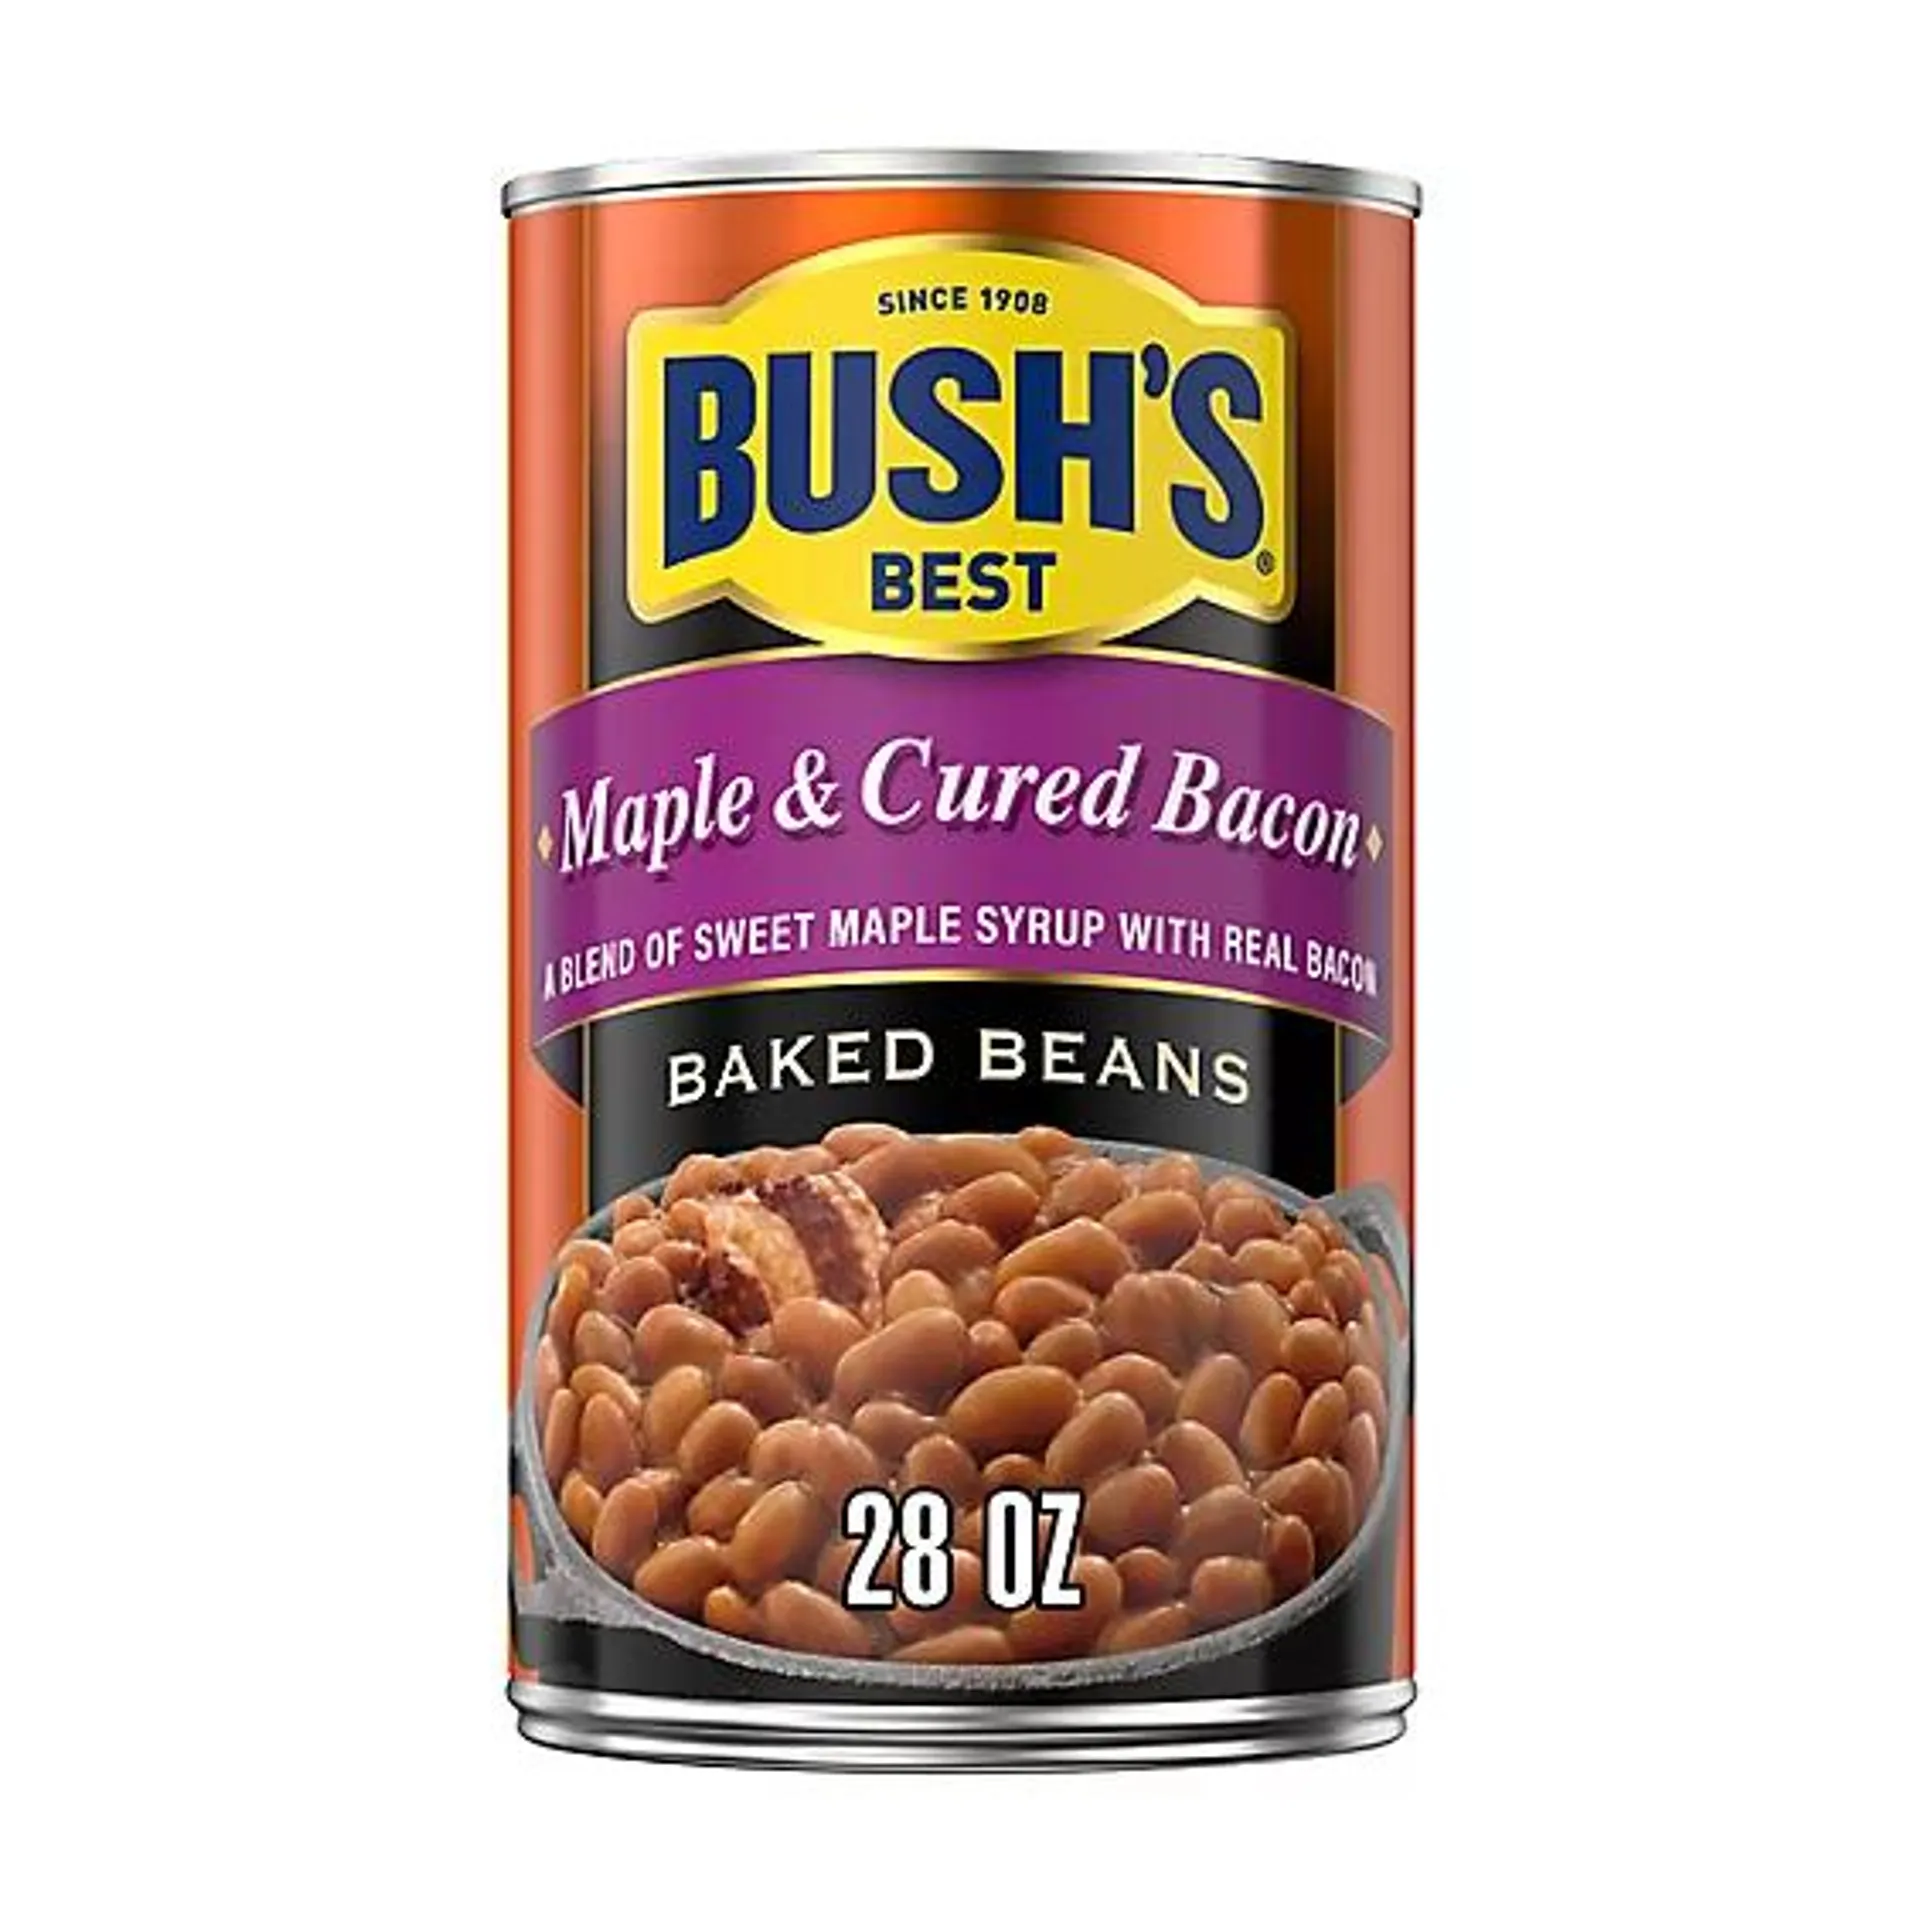 Bush's Maple And Cured Bacon Baked Beans - 28 Oz